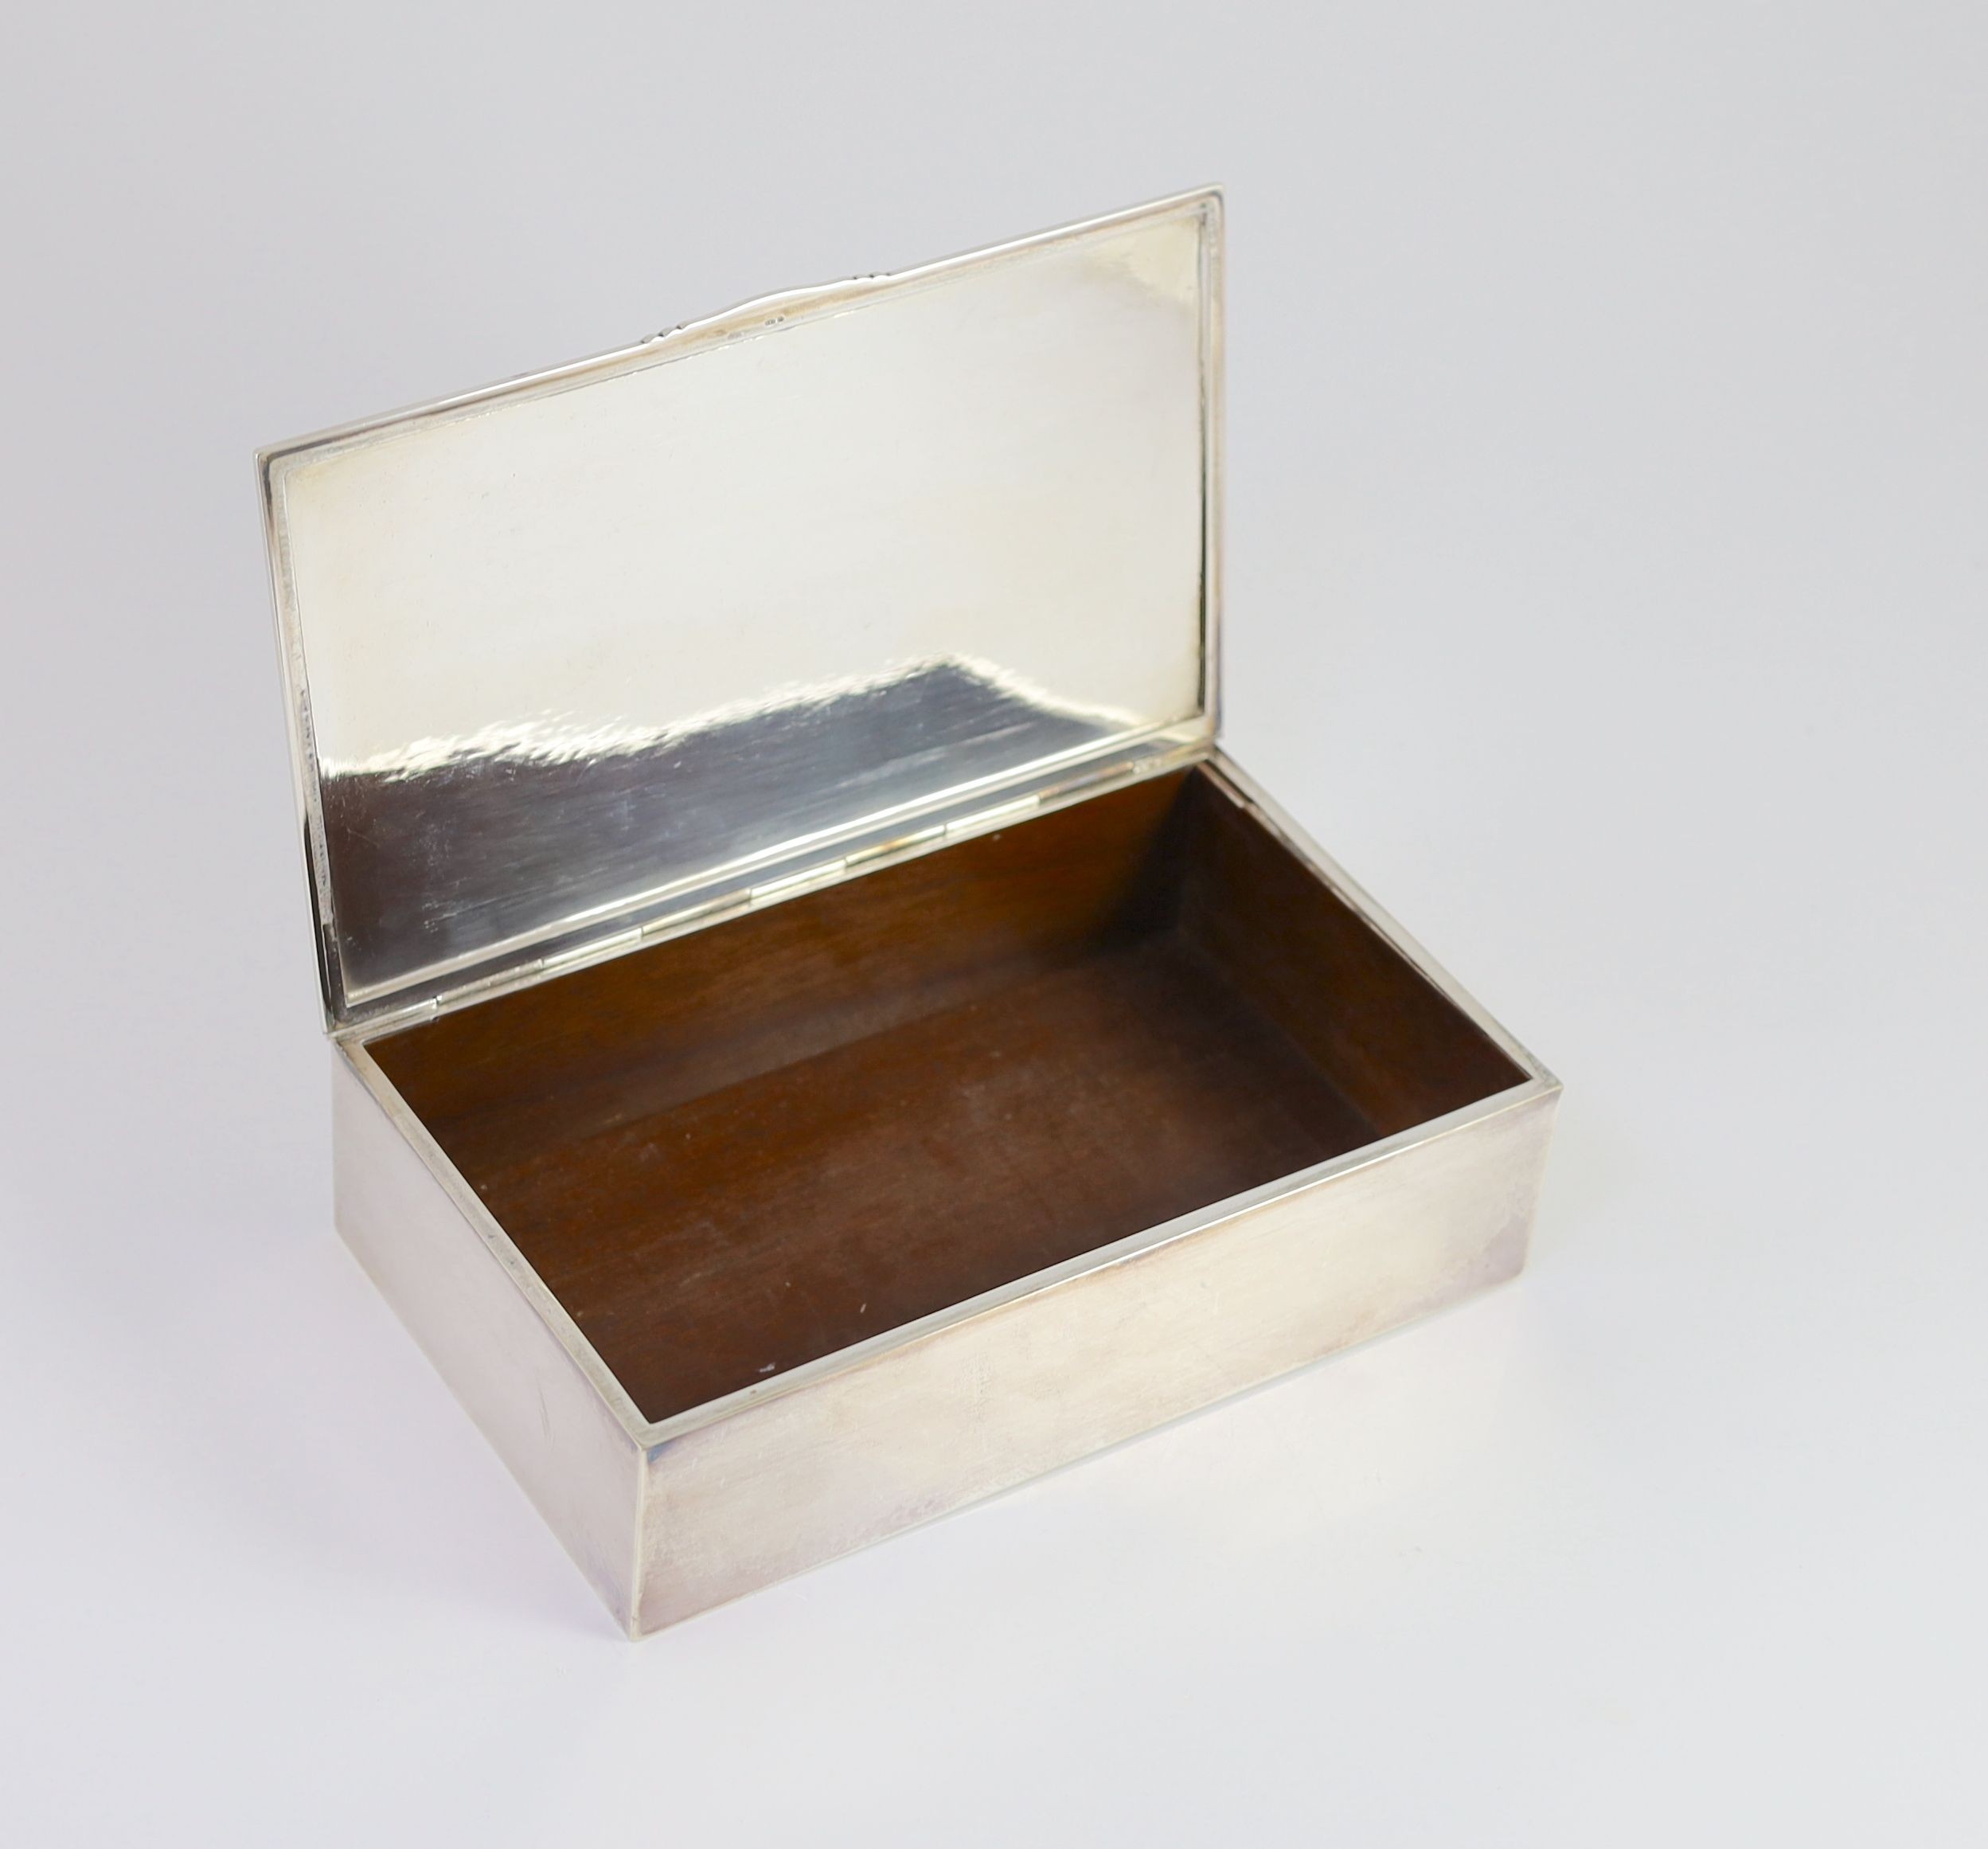 A 1930's planished silver rectangular cigarette box, by Georg Jensen, import marks, for London, 1938